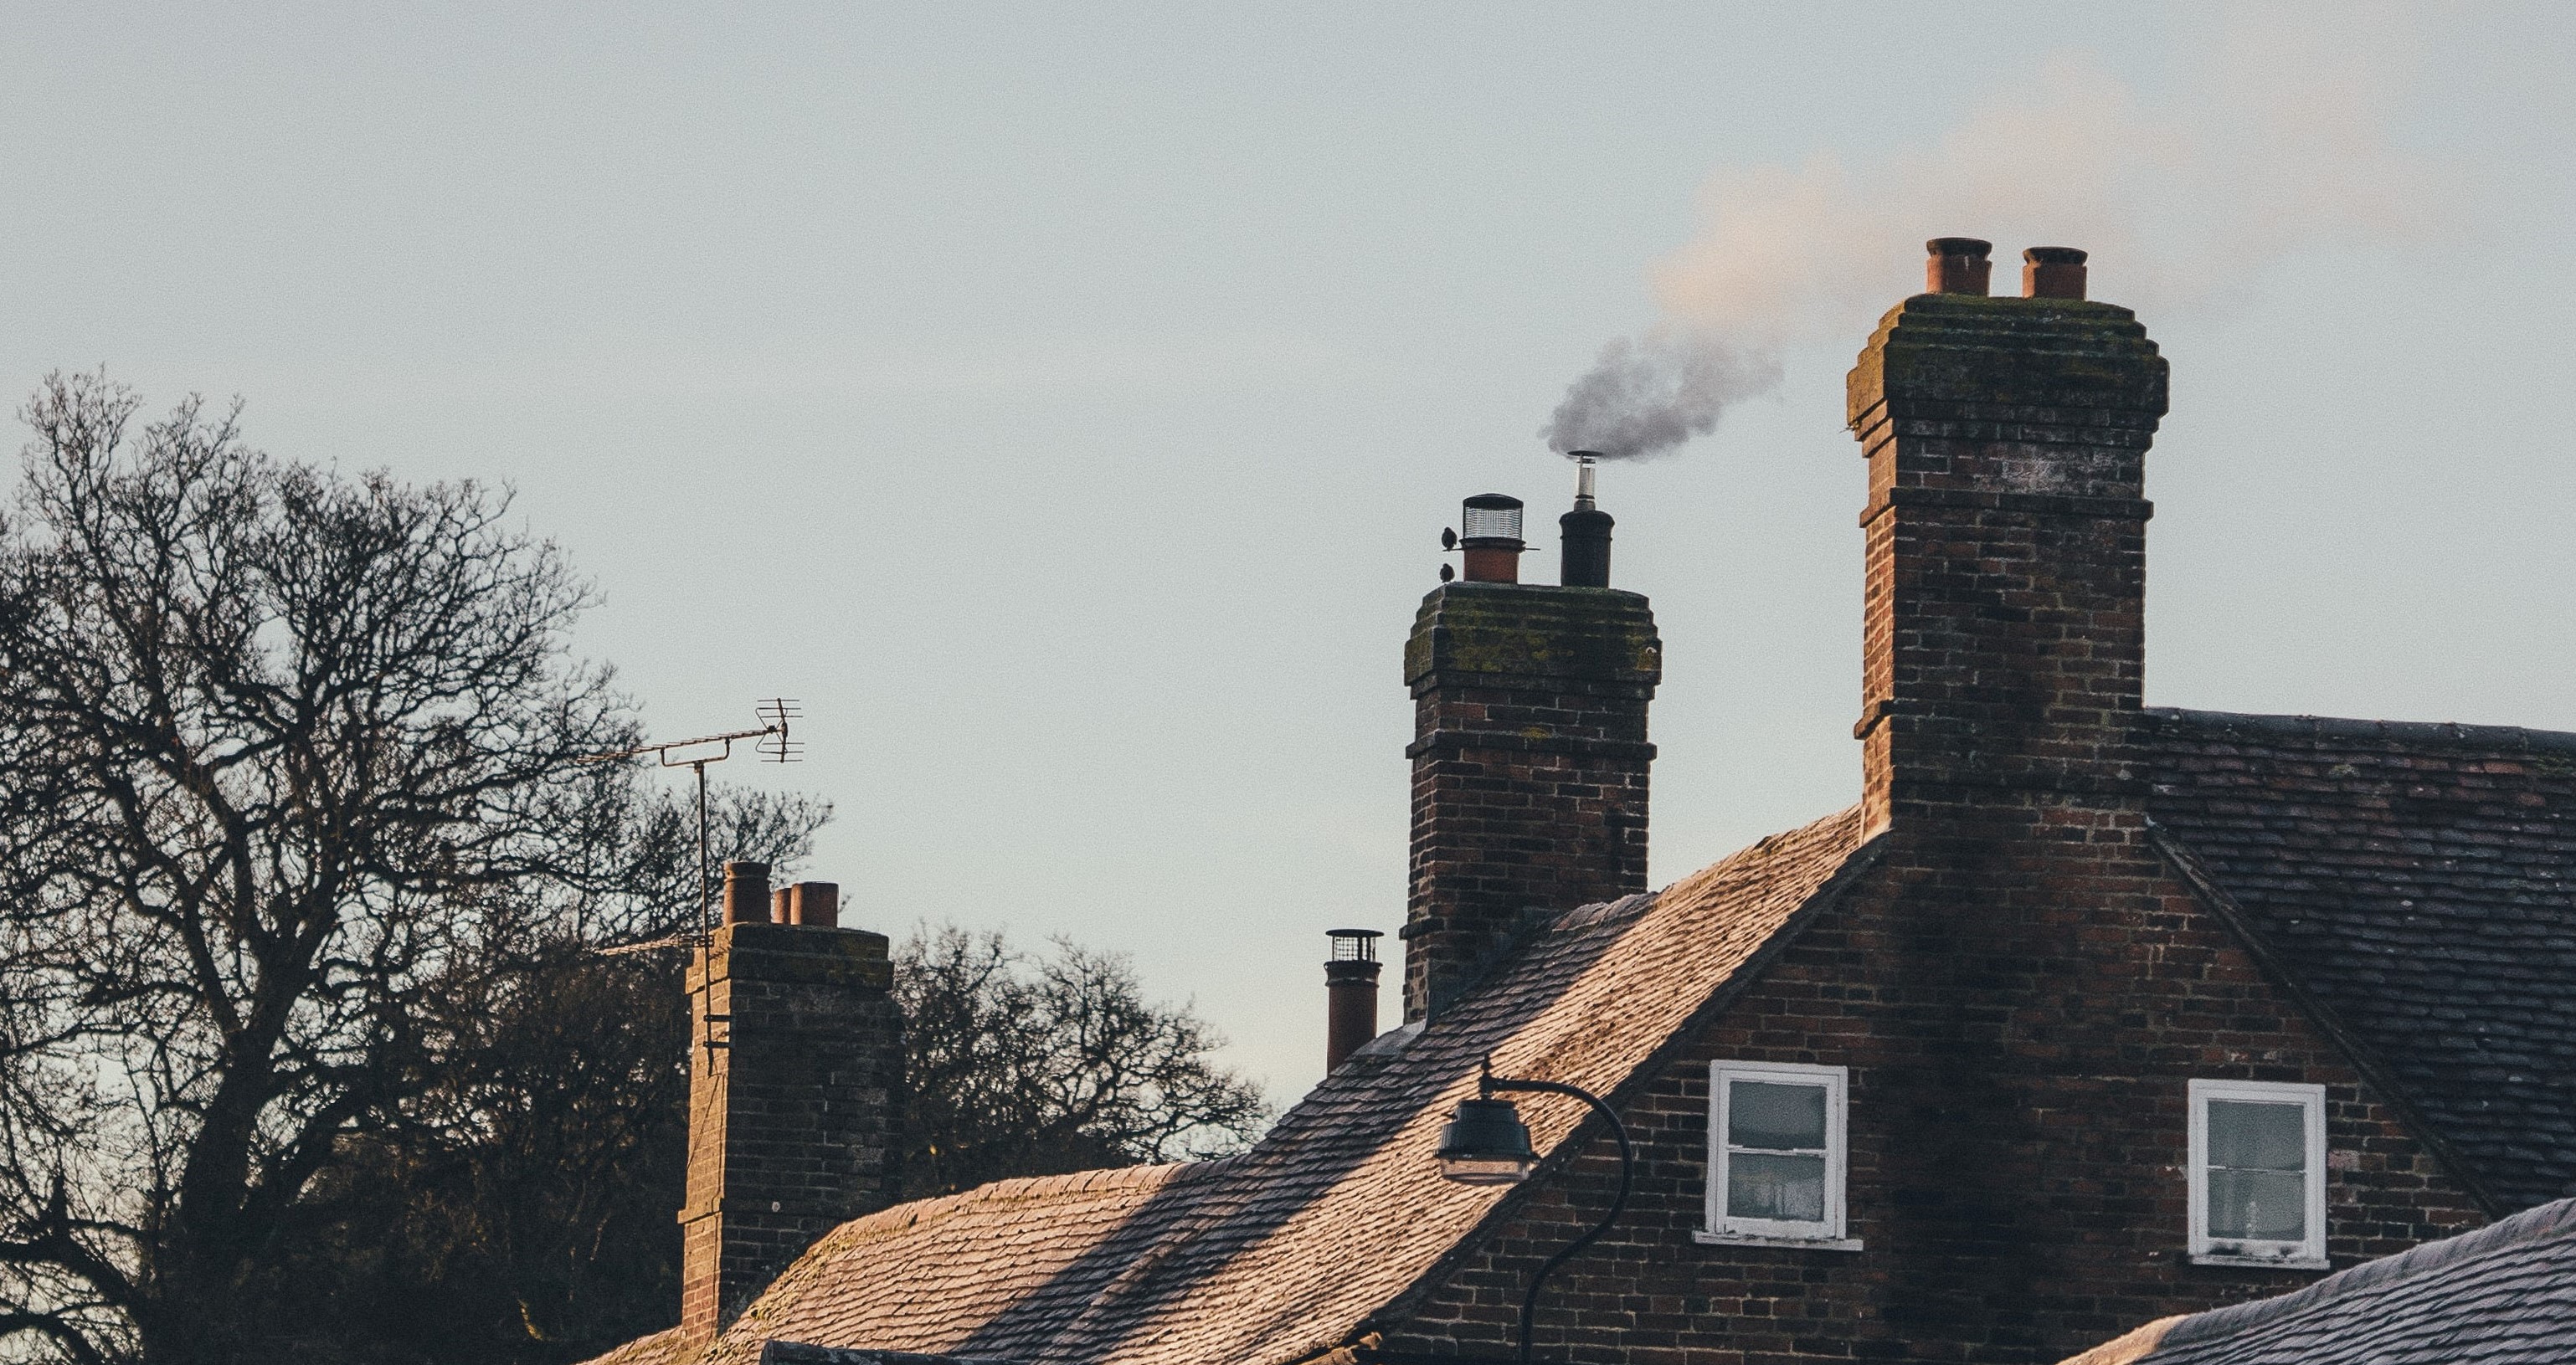 A few chimneys in a row, with smoke coming out of the one in the middle. Only the roofs of the houses can be seen, as well as some of the brick wall of the first in the row, and a grey sky. There are a few trees in the background with no leaves, so it's clearly autumn.